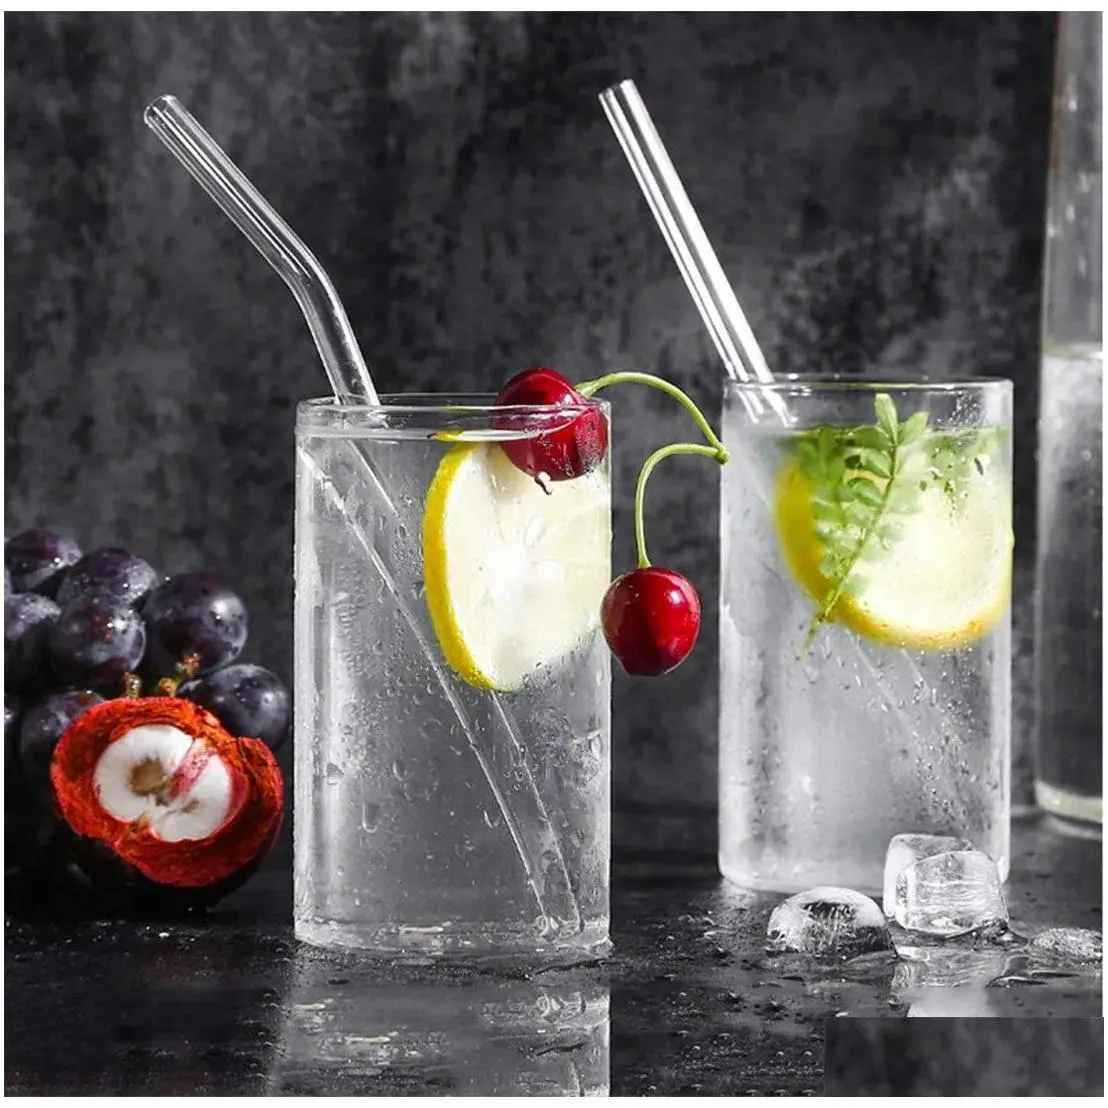 18cm/20cm/25cm reusable eco borosilicate glass drinking straws clear colored bent straight milk cocktail straw